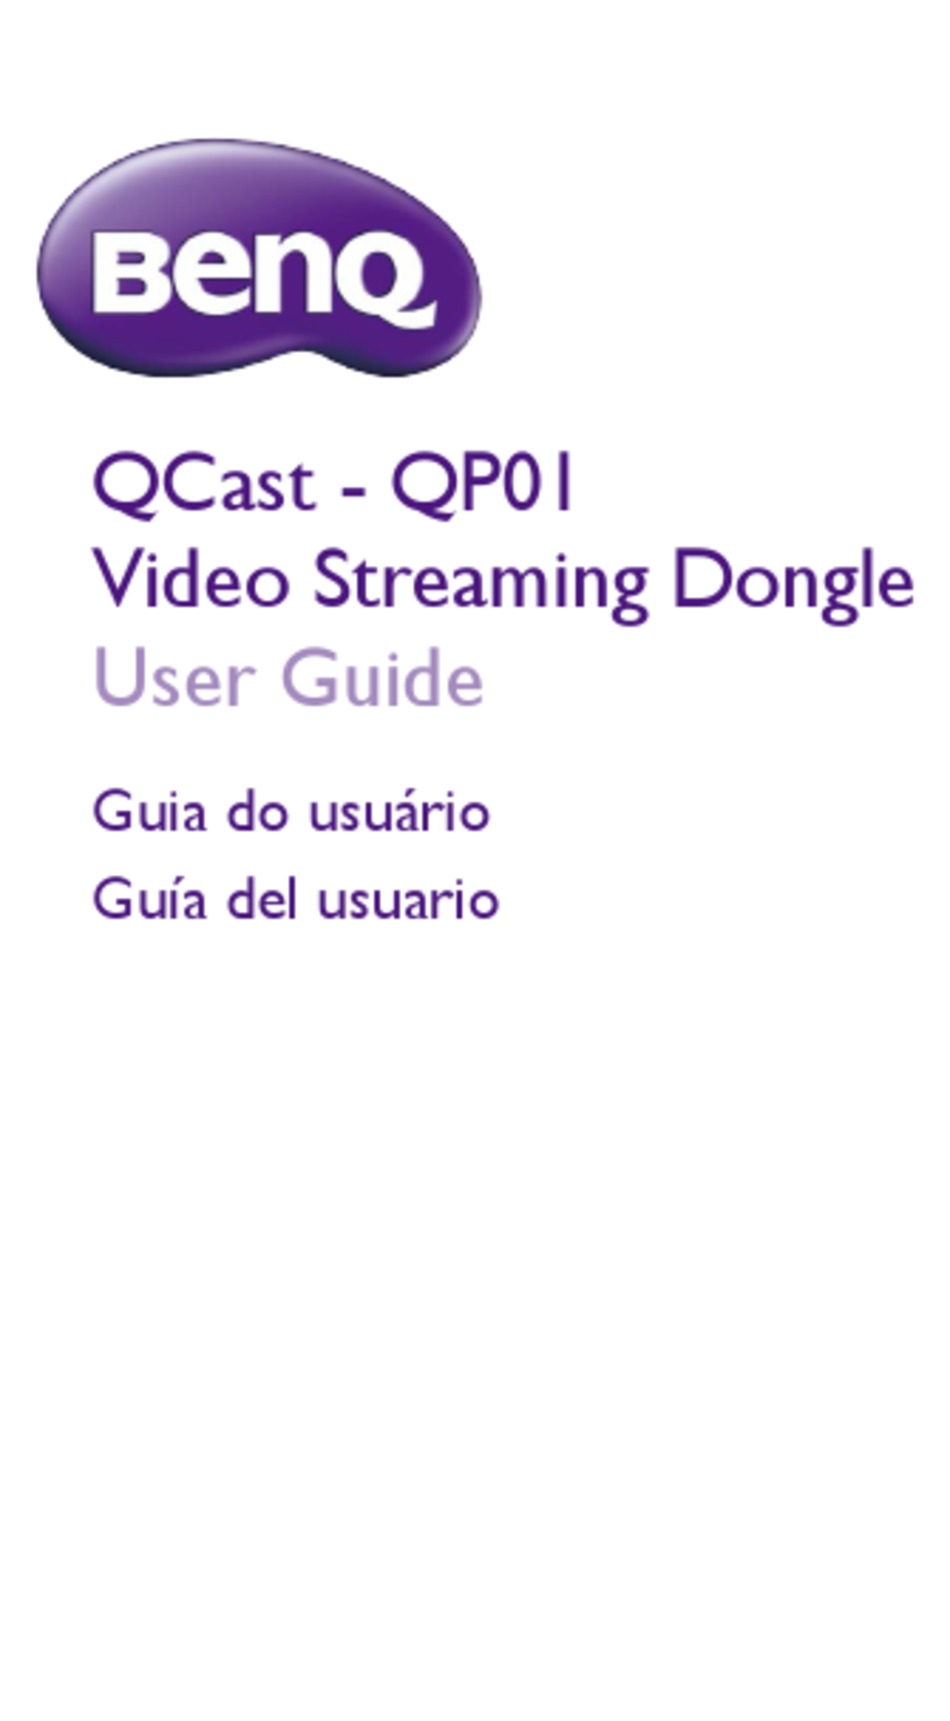 qcast podcasts and